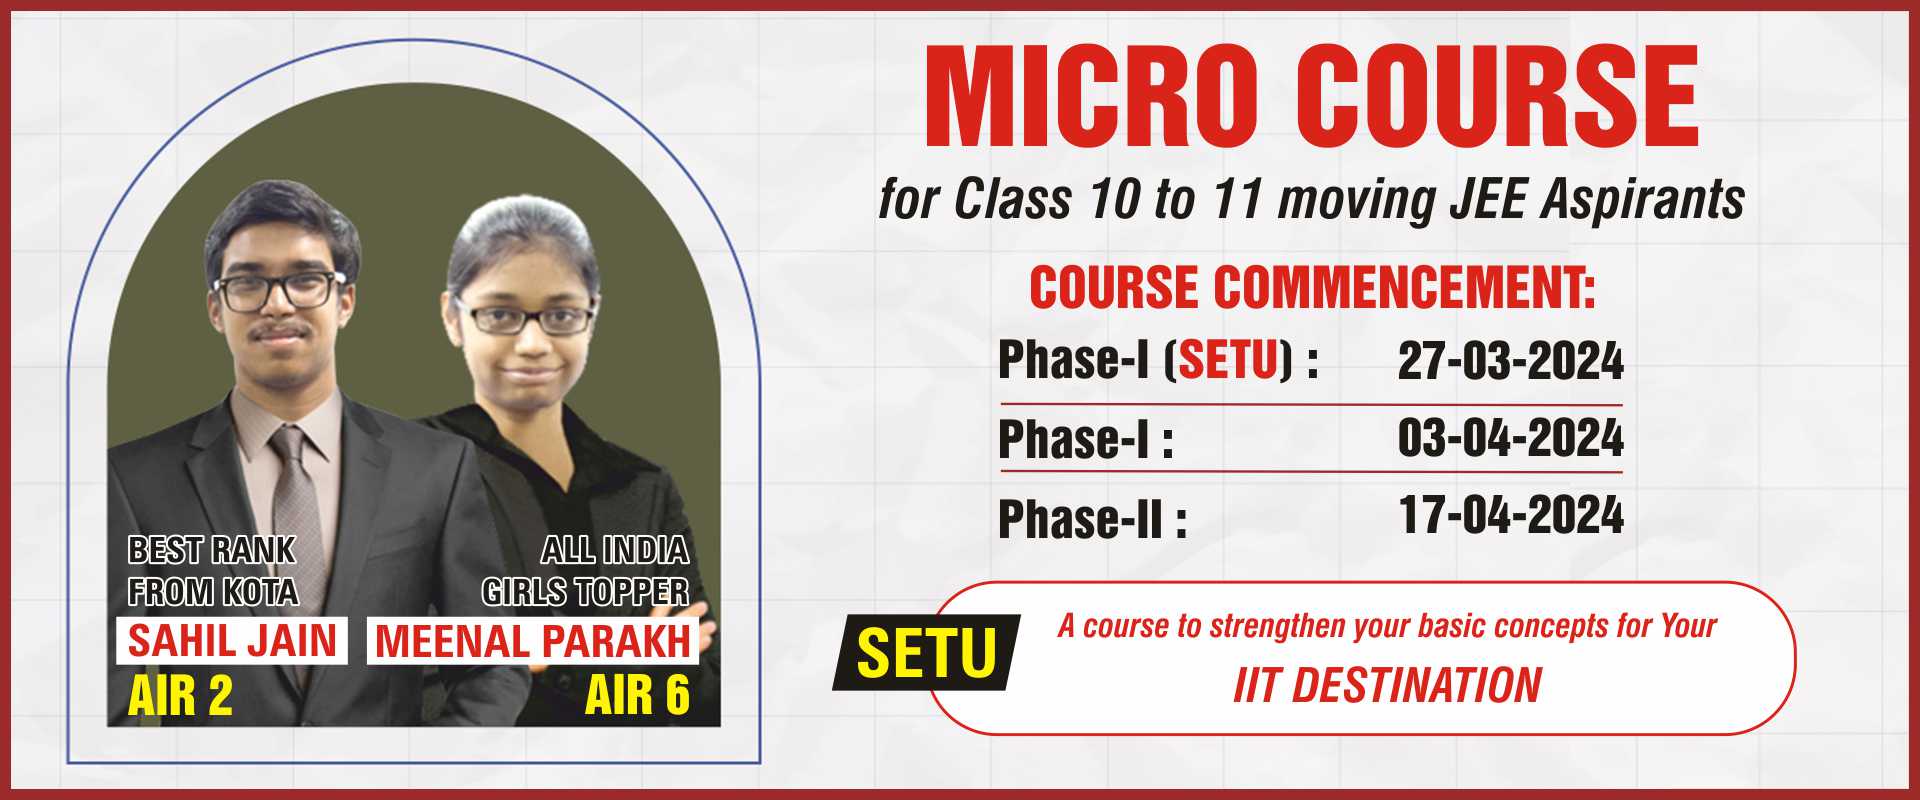 MICRO COURSE for Class 10 to 11 moving JEE Aspirants